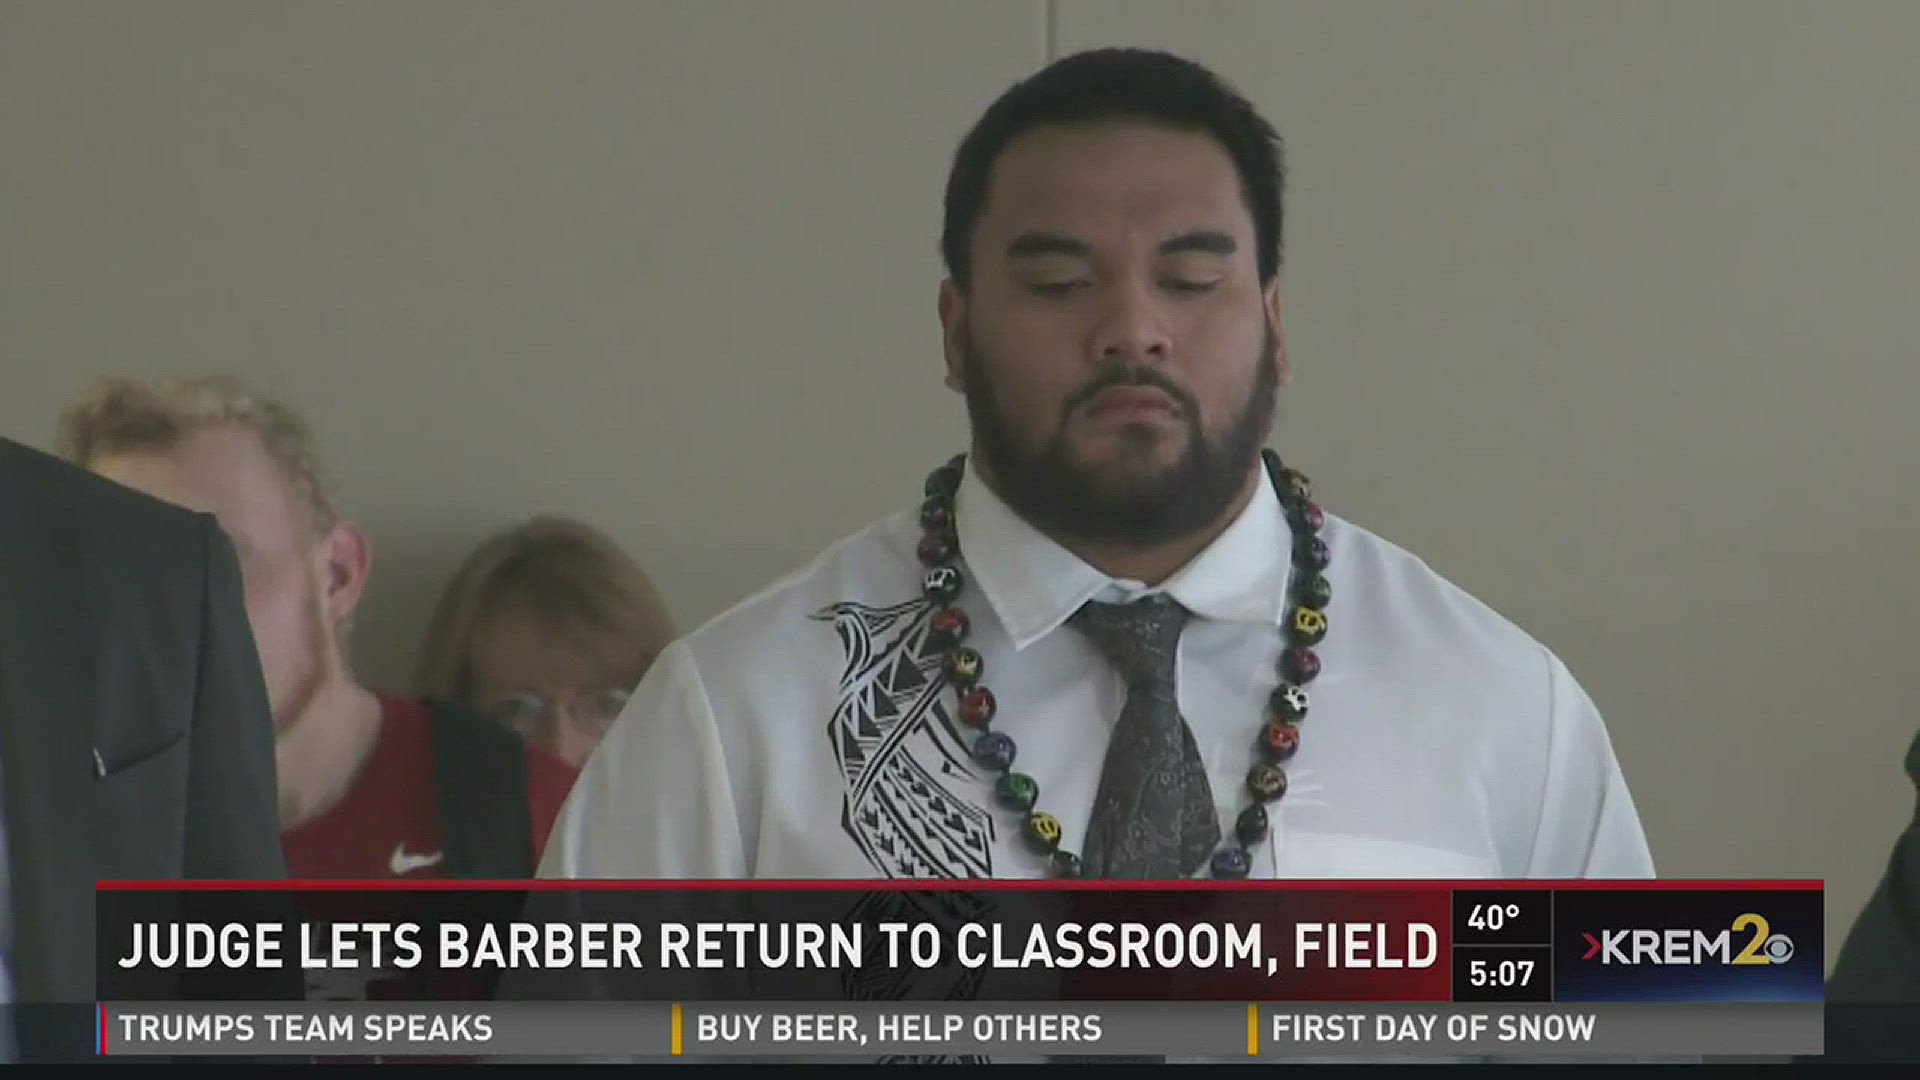 Robert Barber will be allowed to return to the classroom and the field after being suspended. As KREM 2's Taylor Viydo reports, Barber is accused of assaulting another student at a party earlier this year.  (11/16/16 at 5 p.m.)